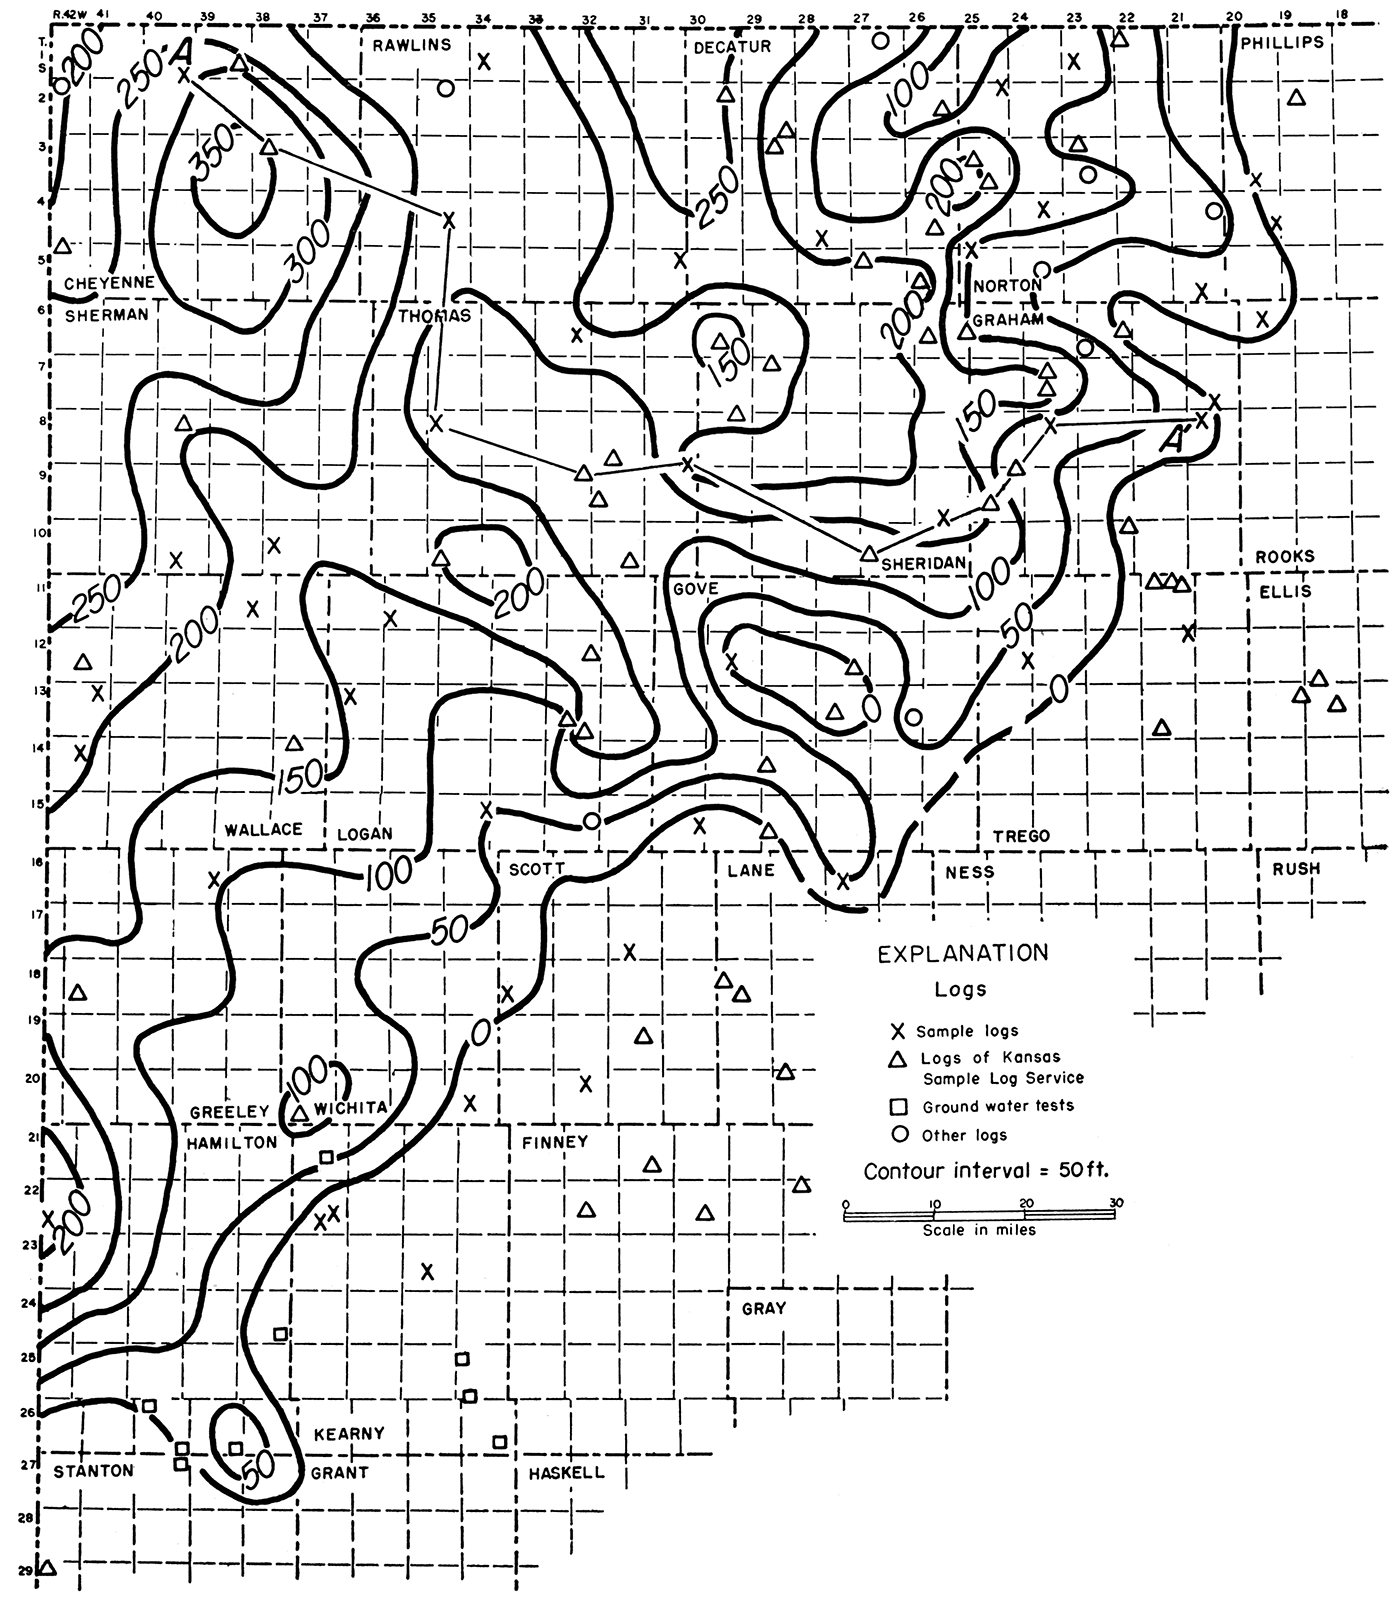 Isopachous map showing by 50-foot thickness lines the generalized thickness of the Morrison formation in northwestern Kansas.